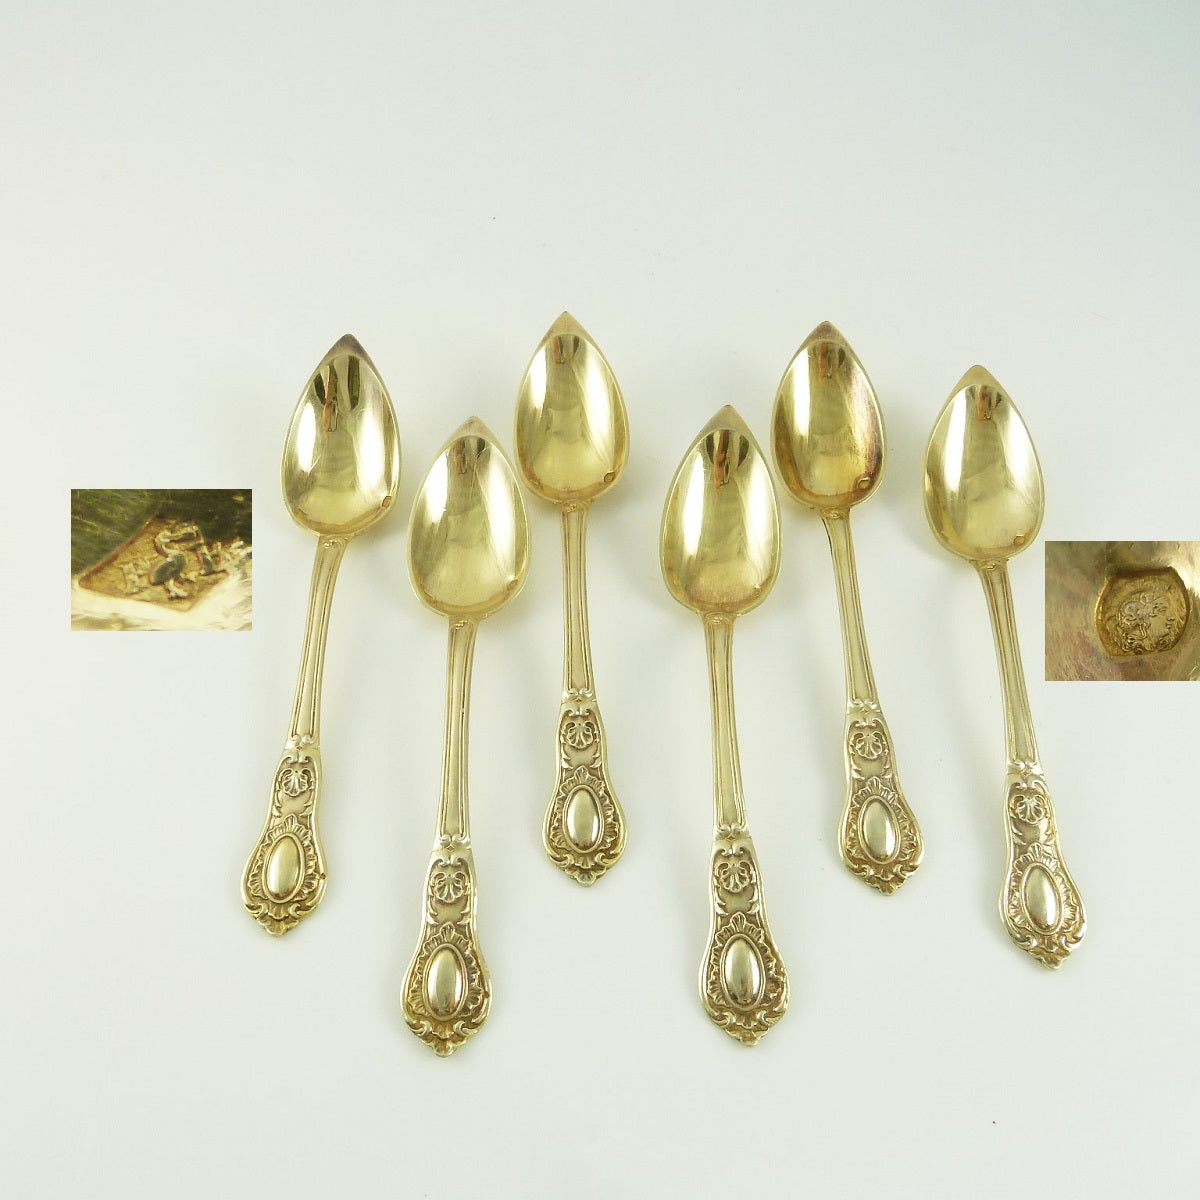 Antique French Silver & Vermeil Coffee Spoons with Presentation Case, Set of Six - 43 Chesapeake Court Antiques